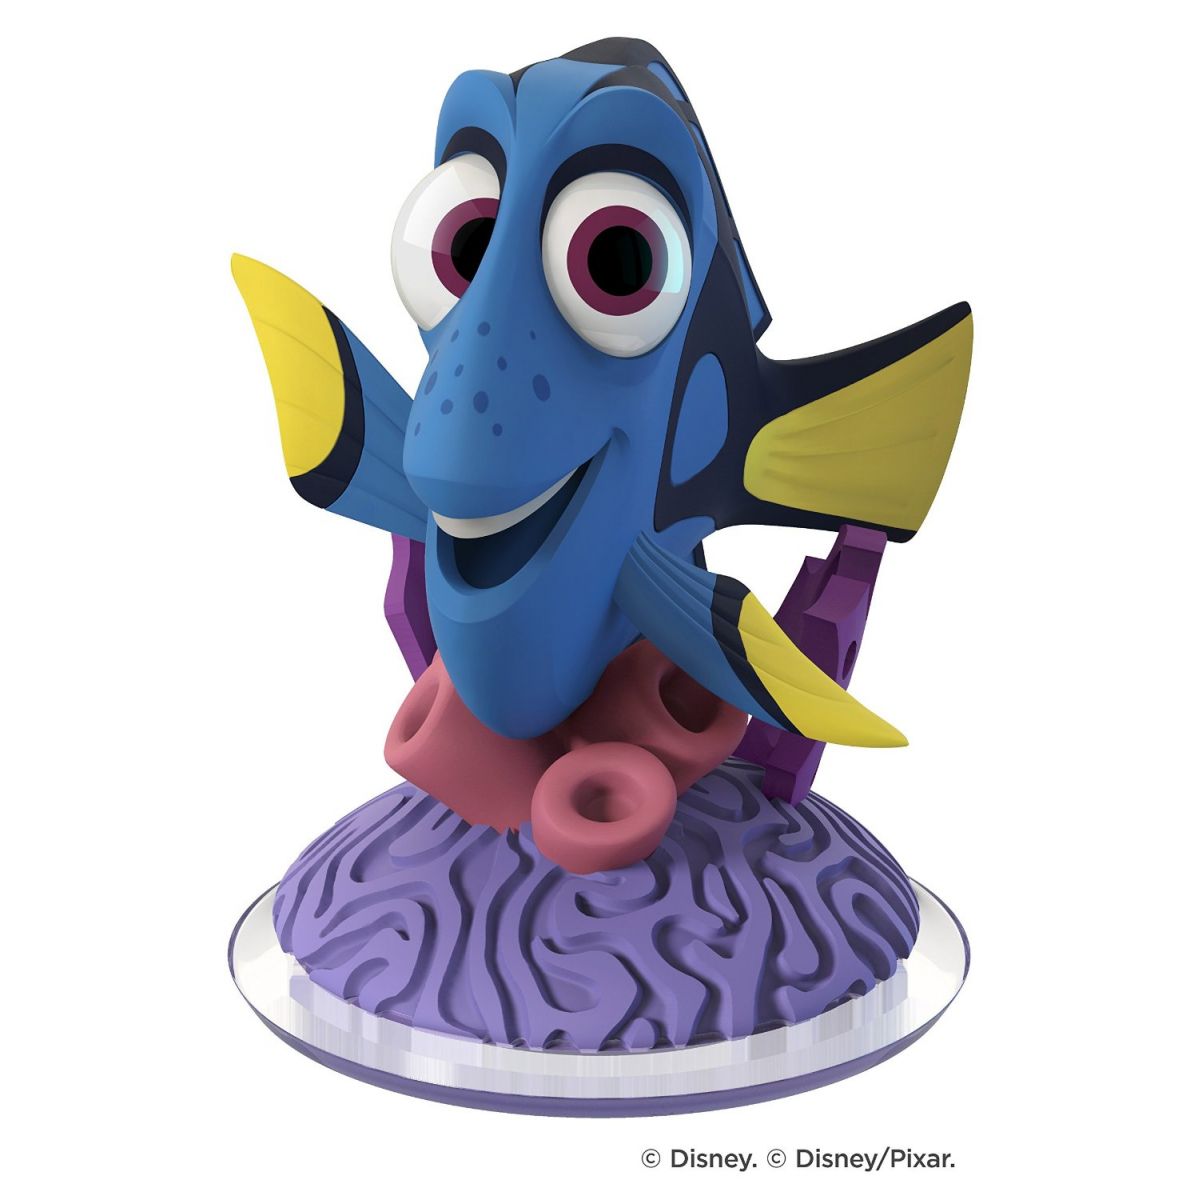 Disney Infinity 3.0 Edition: Finding Dory Play Set - Movie Freaks Collectibles